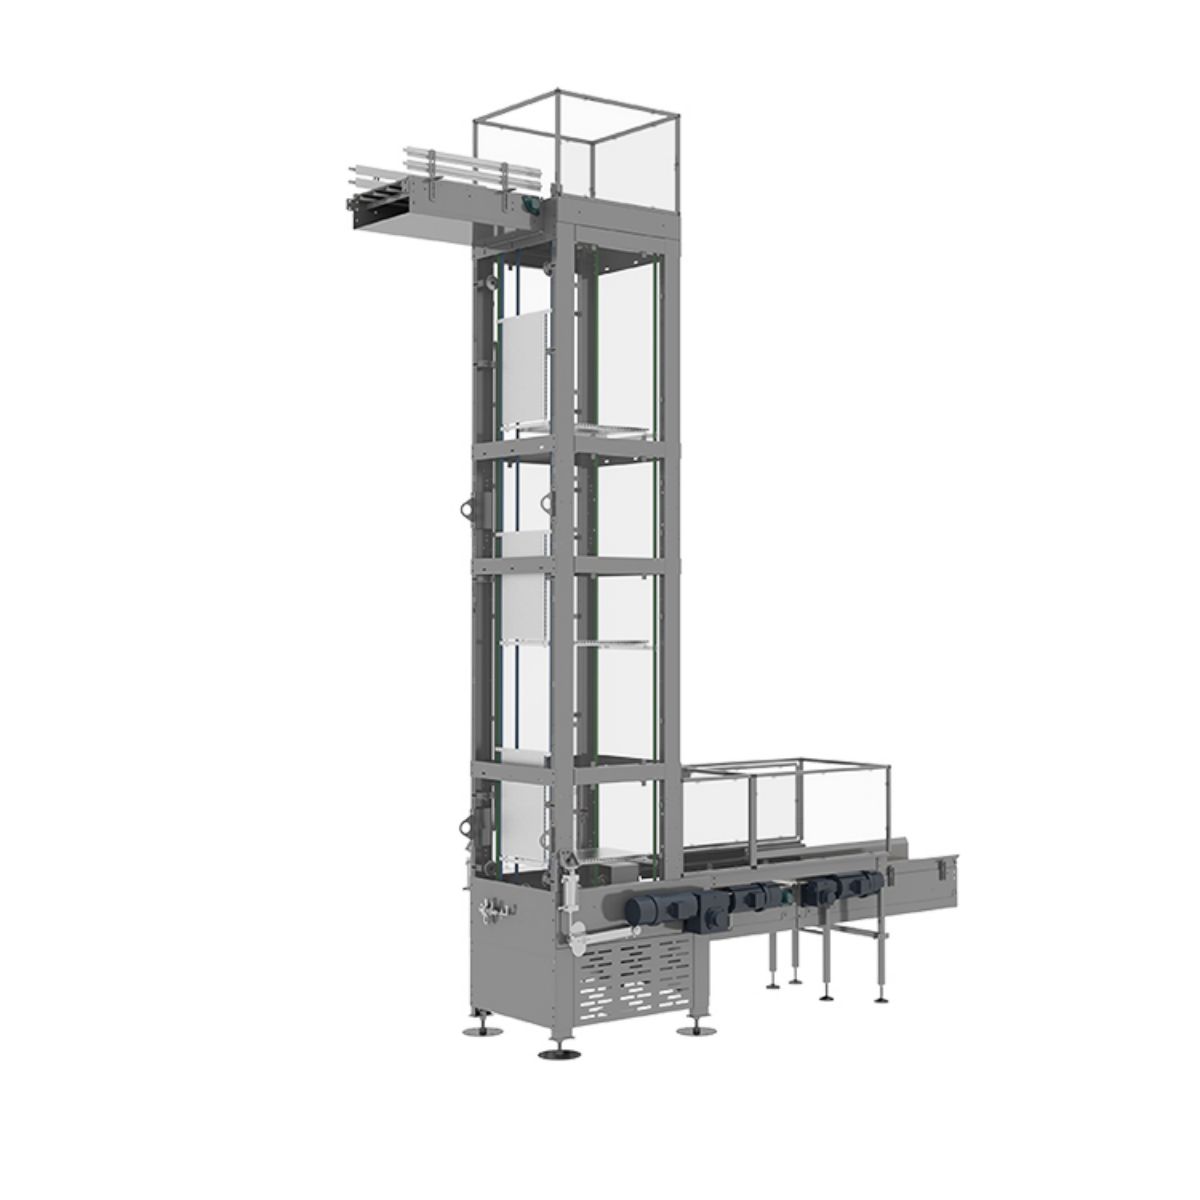 The Continuous Vertical lift conveyor: How to Improve Modern Warehouse Management